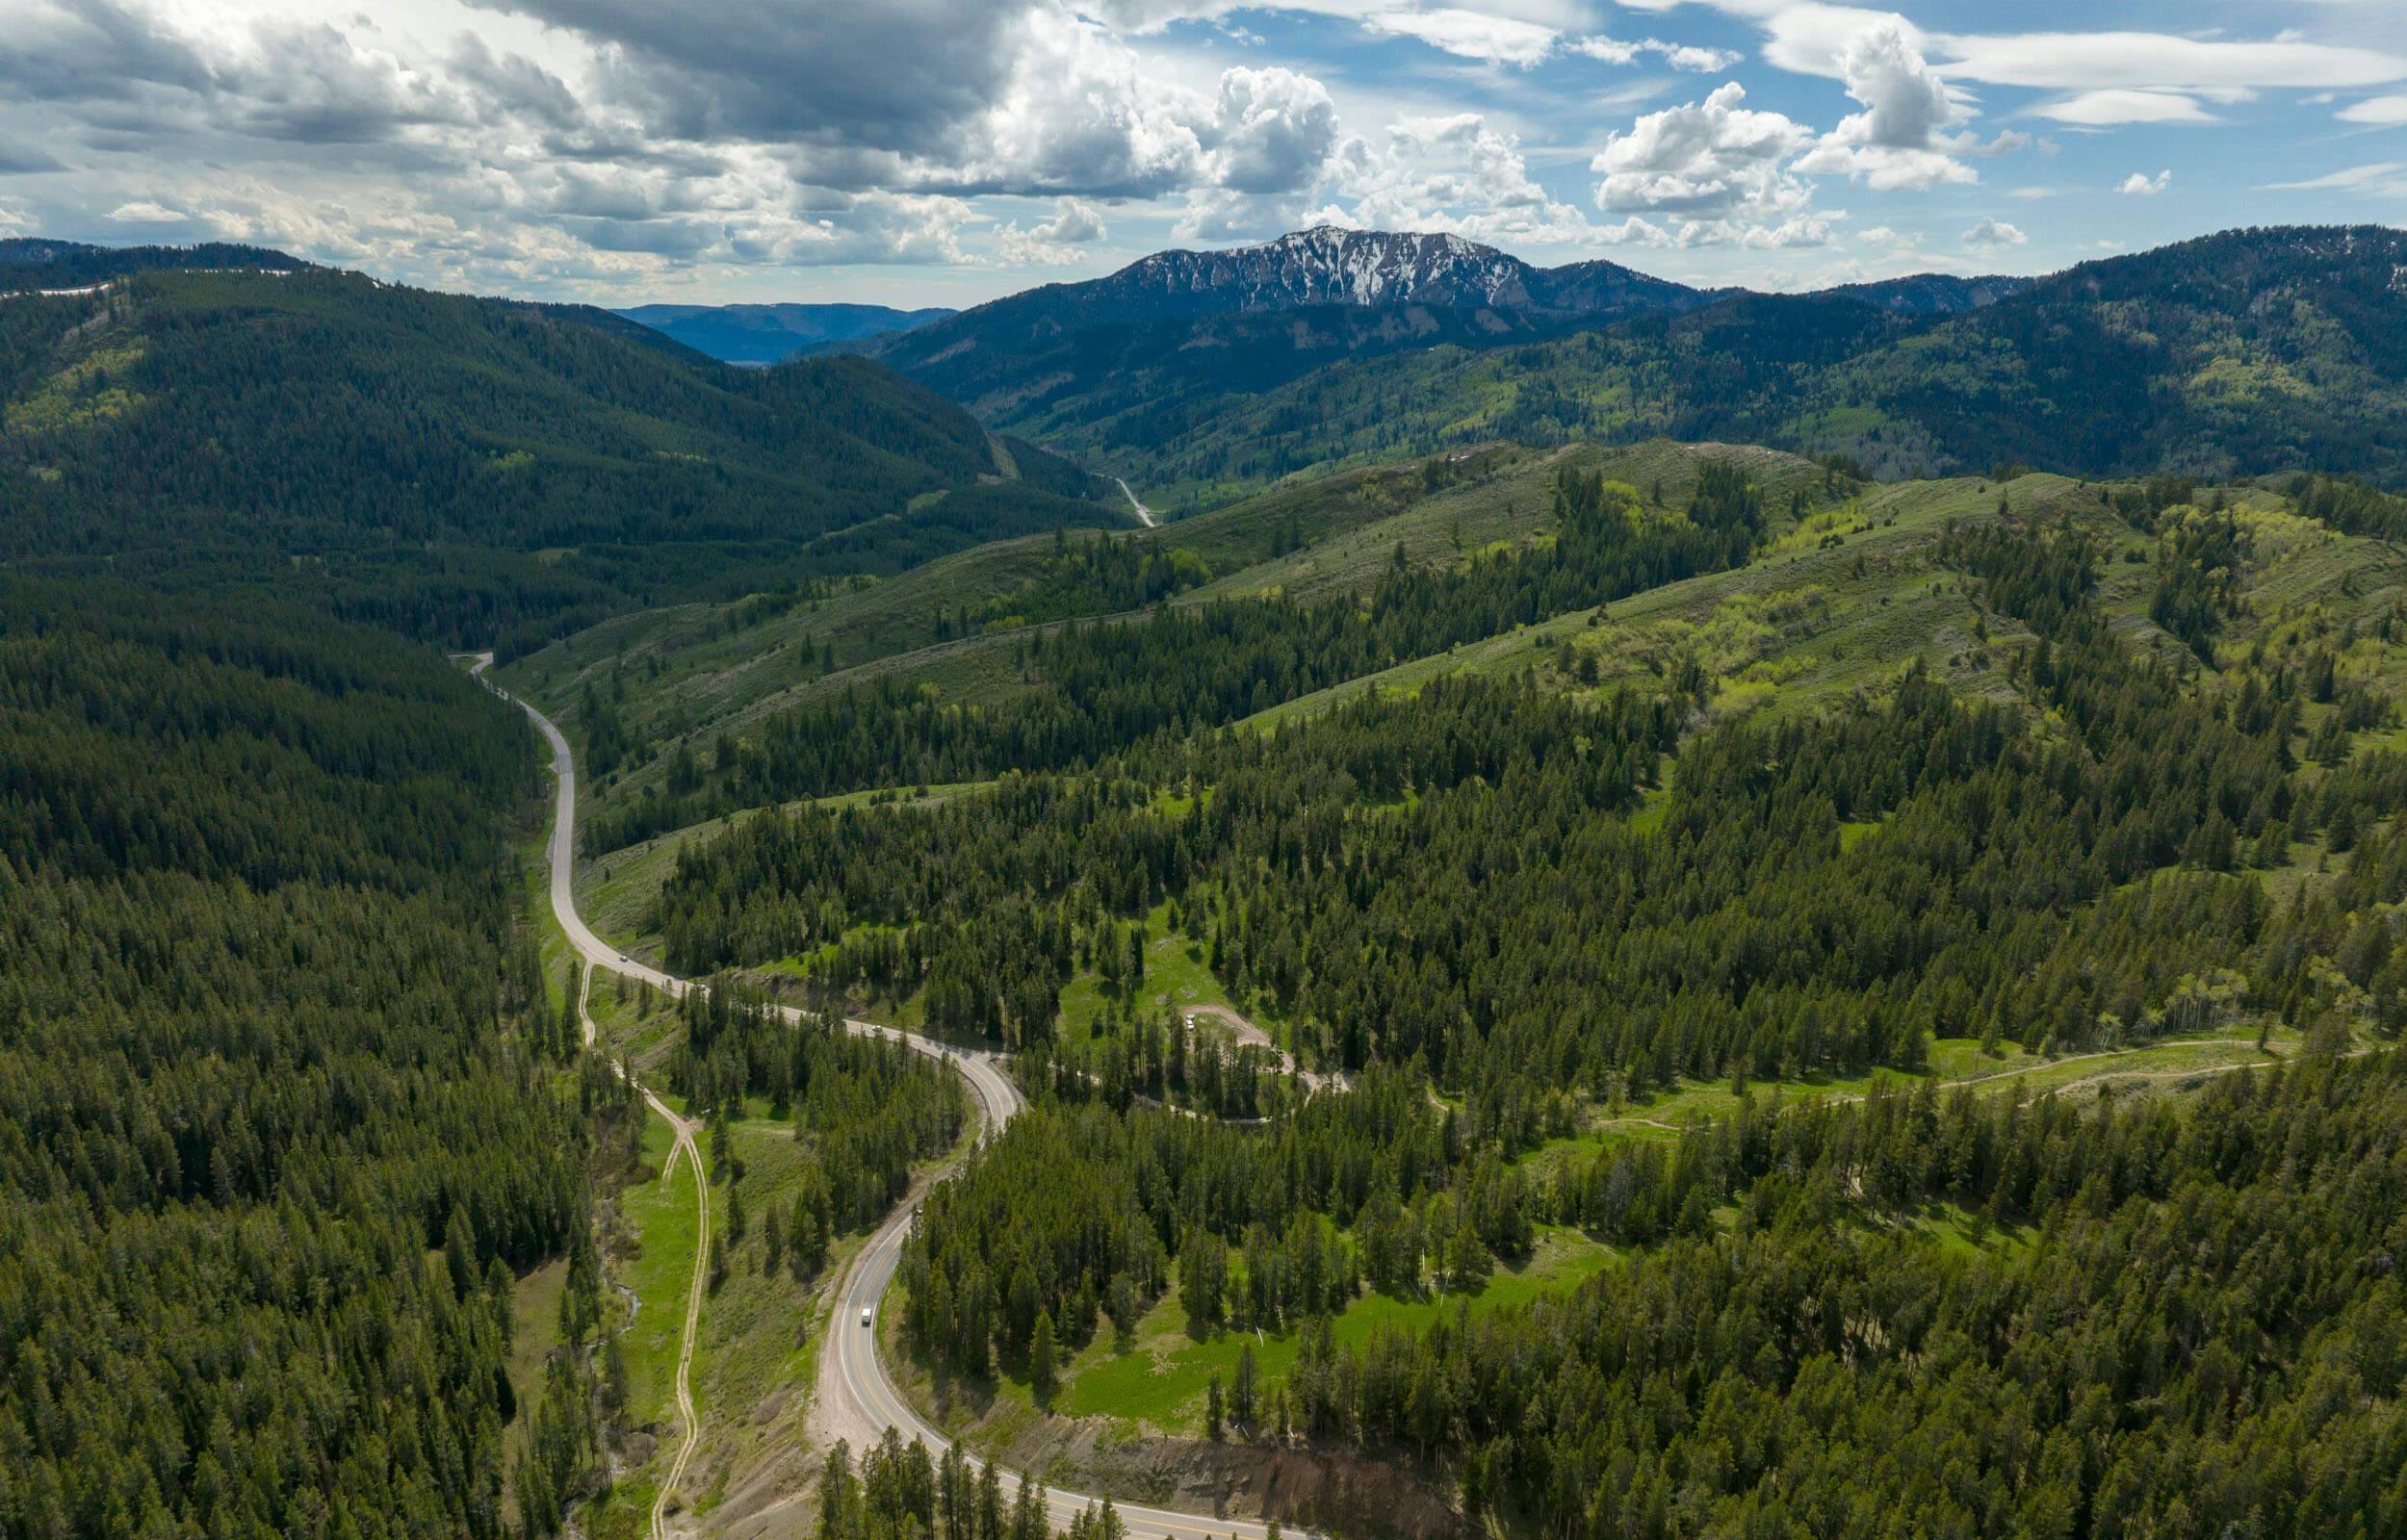 An aerial view of a road winding through a mountain pass filled with trees.